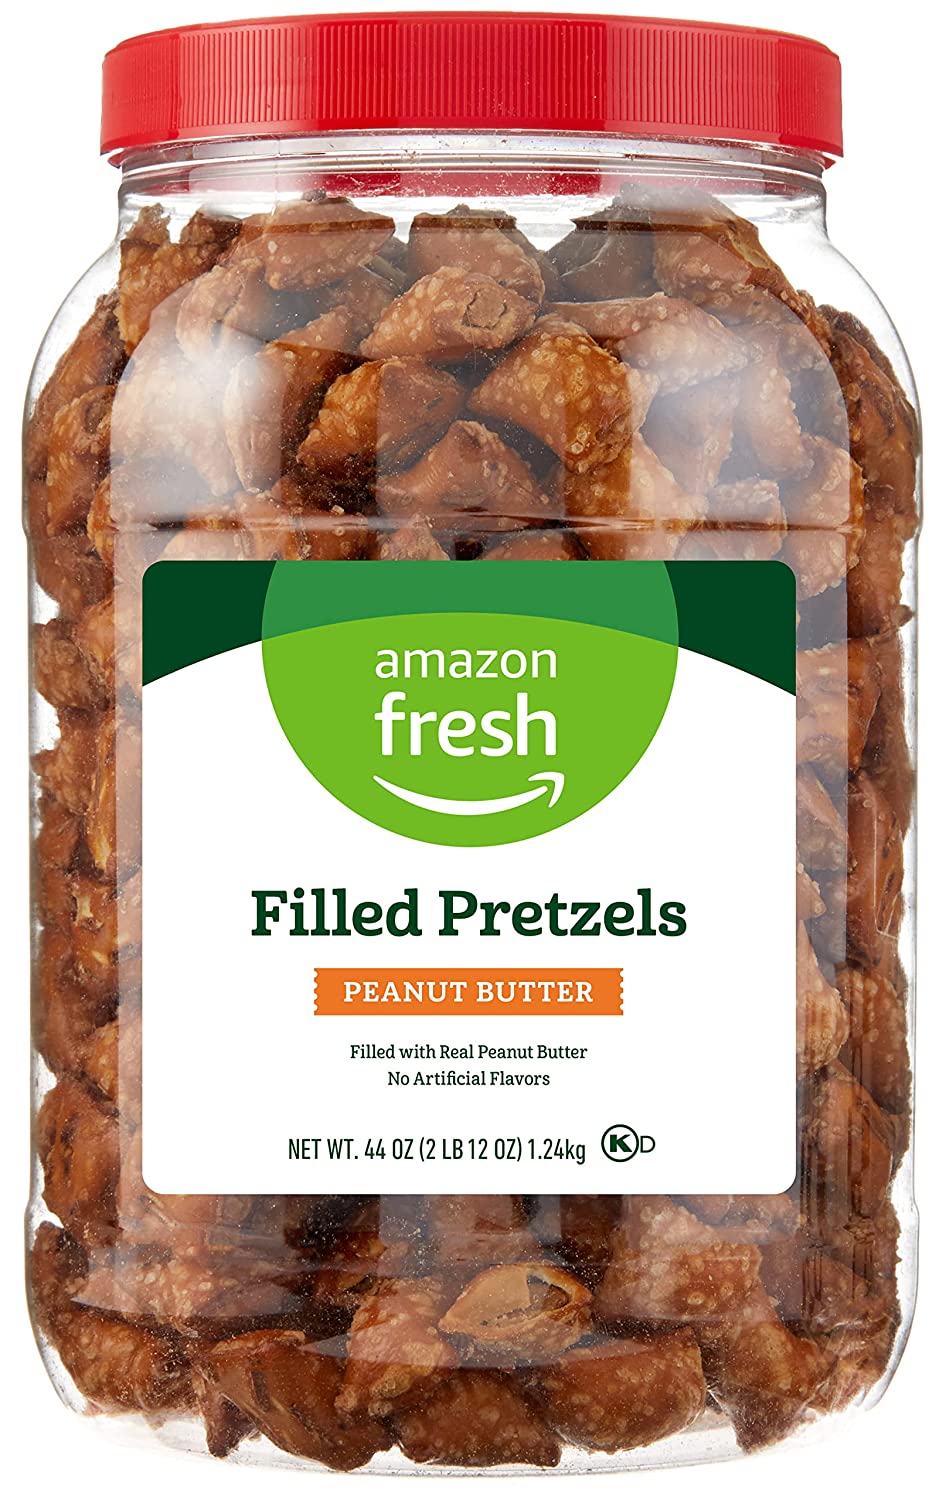 44-Oz Wickedly Prime Peanut Butter Filled Pretzels $8.80 w/ Subscribe & Save